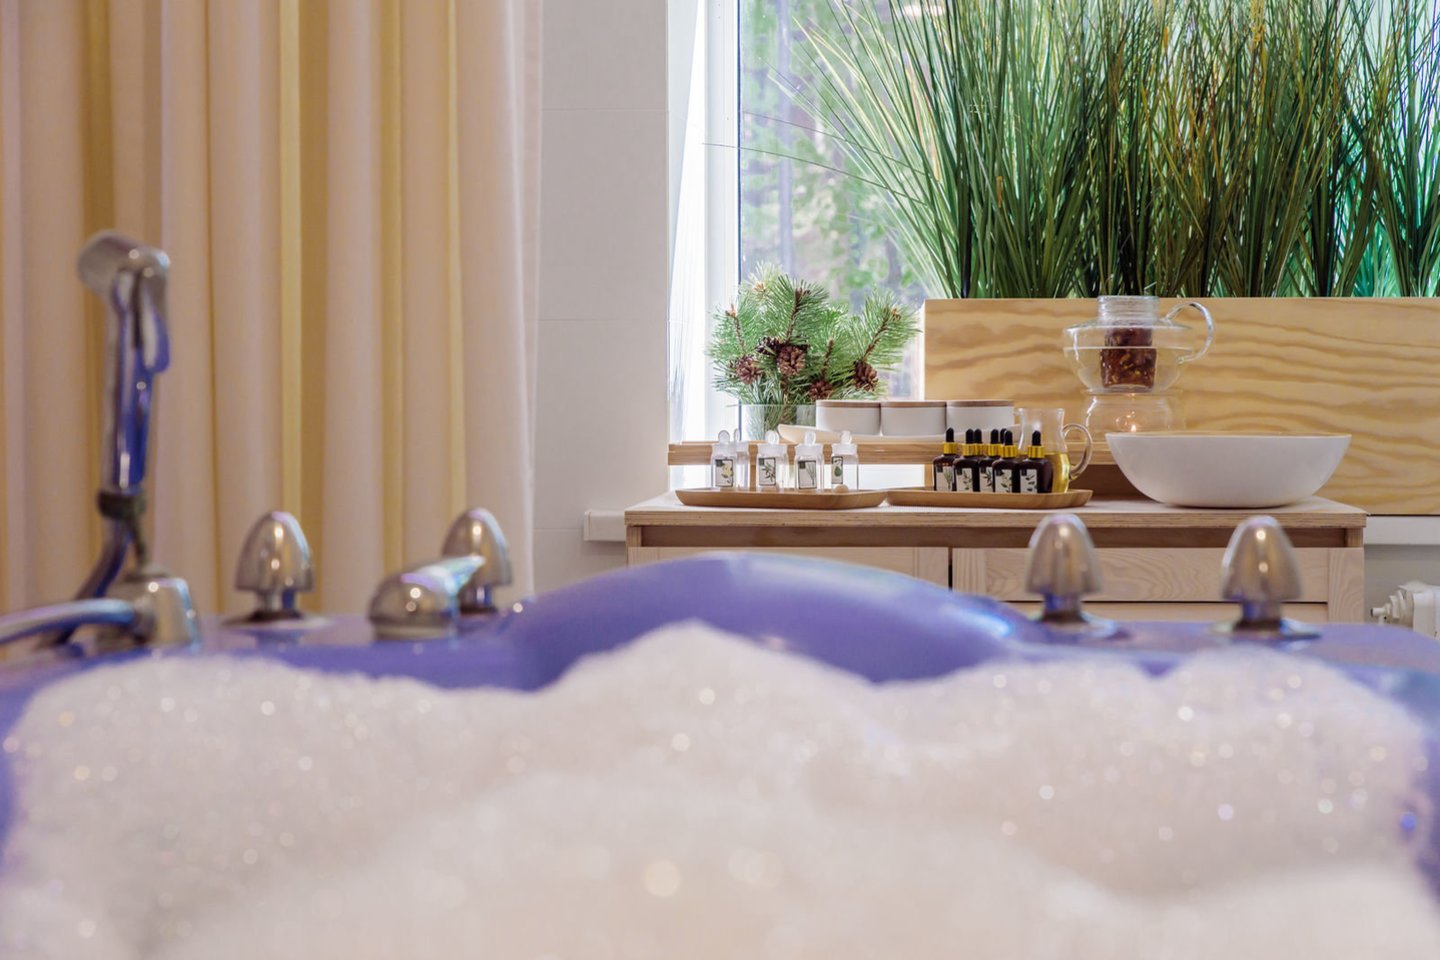  Among the most exceptional treatments mentioned are the original, master-created treatments performed at SPA VILNIUS.